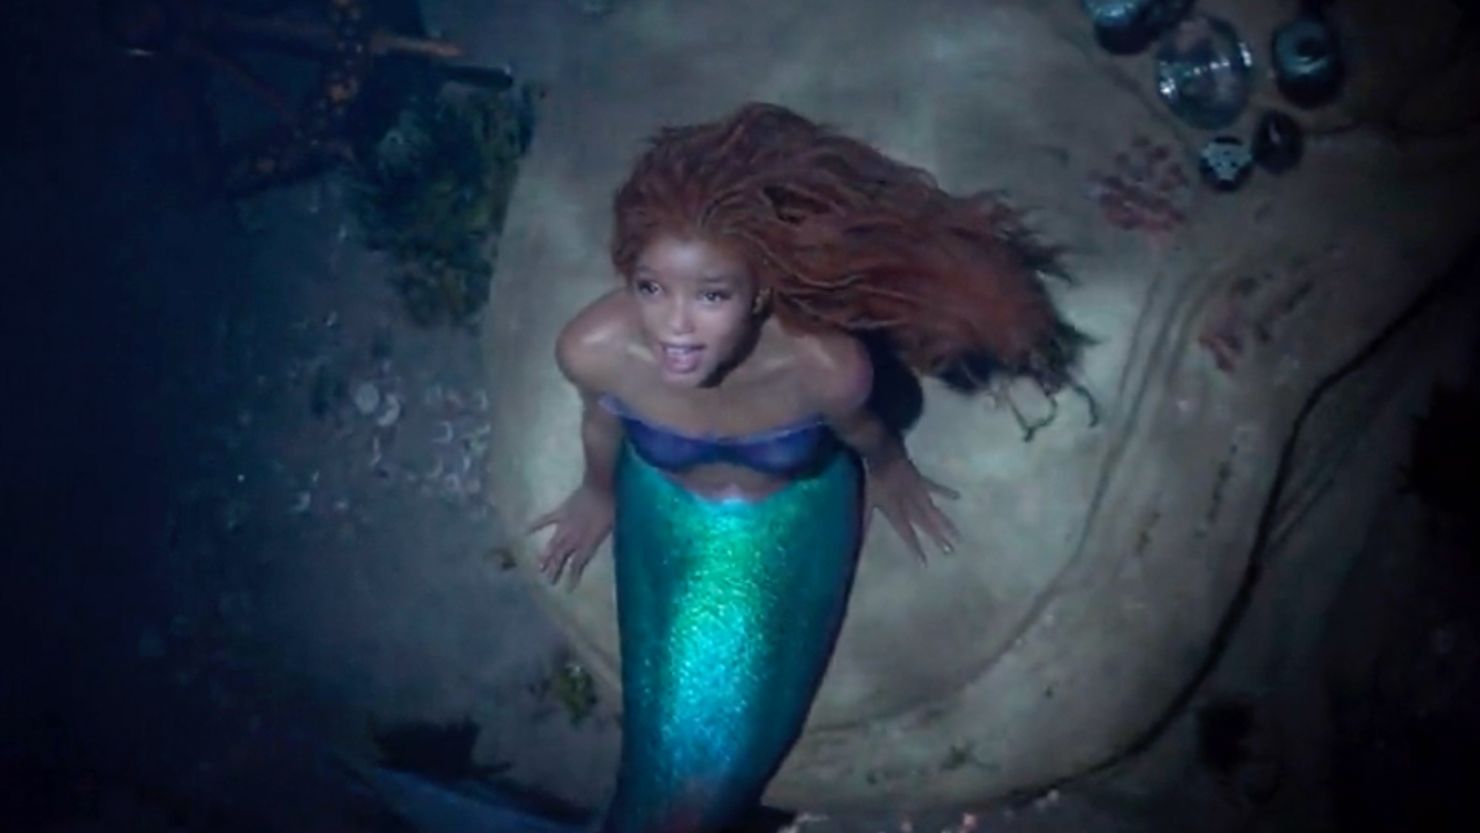 Disney's 'The Little Mermaid' is coming to theaters on May 26, 2023.